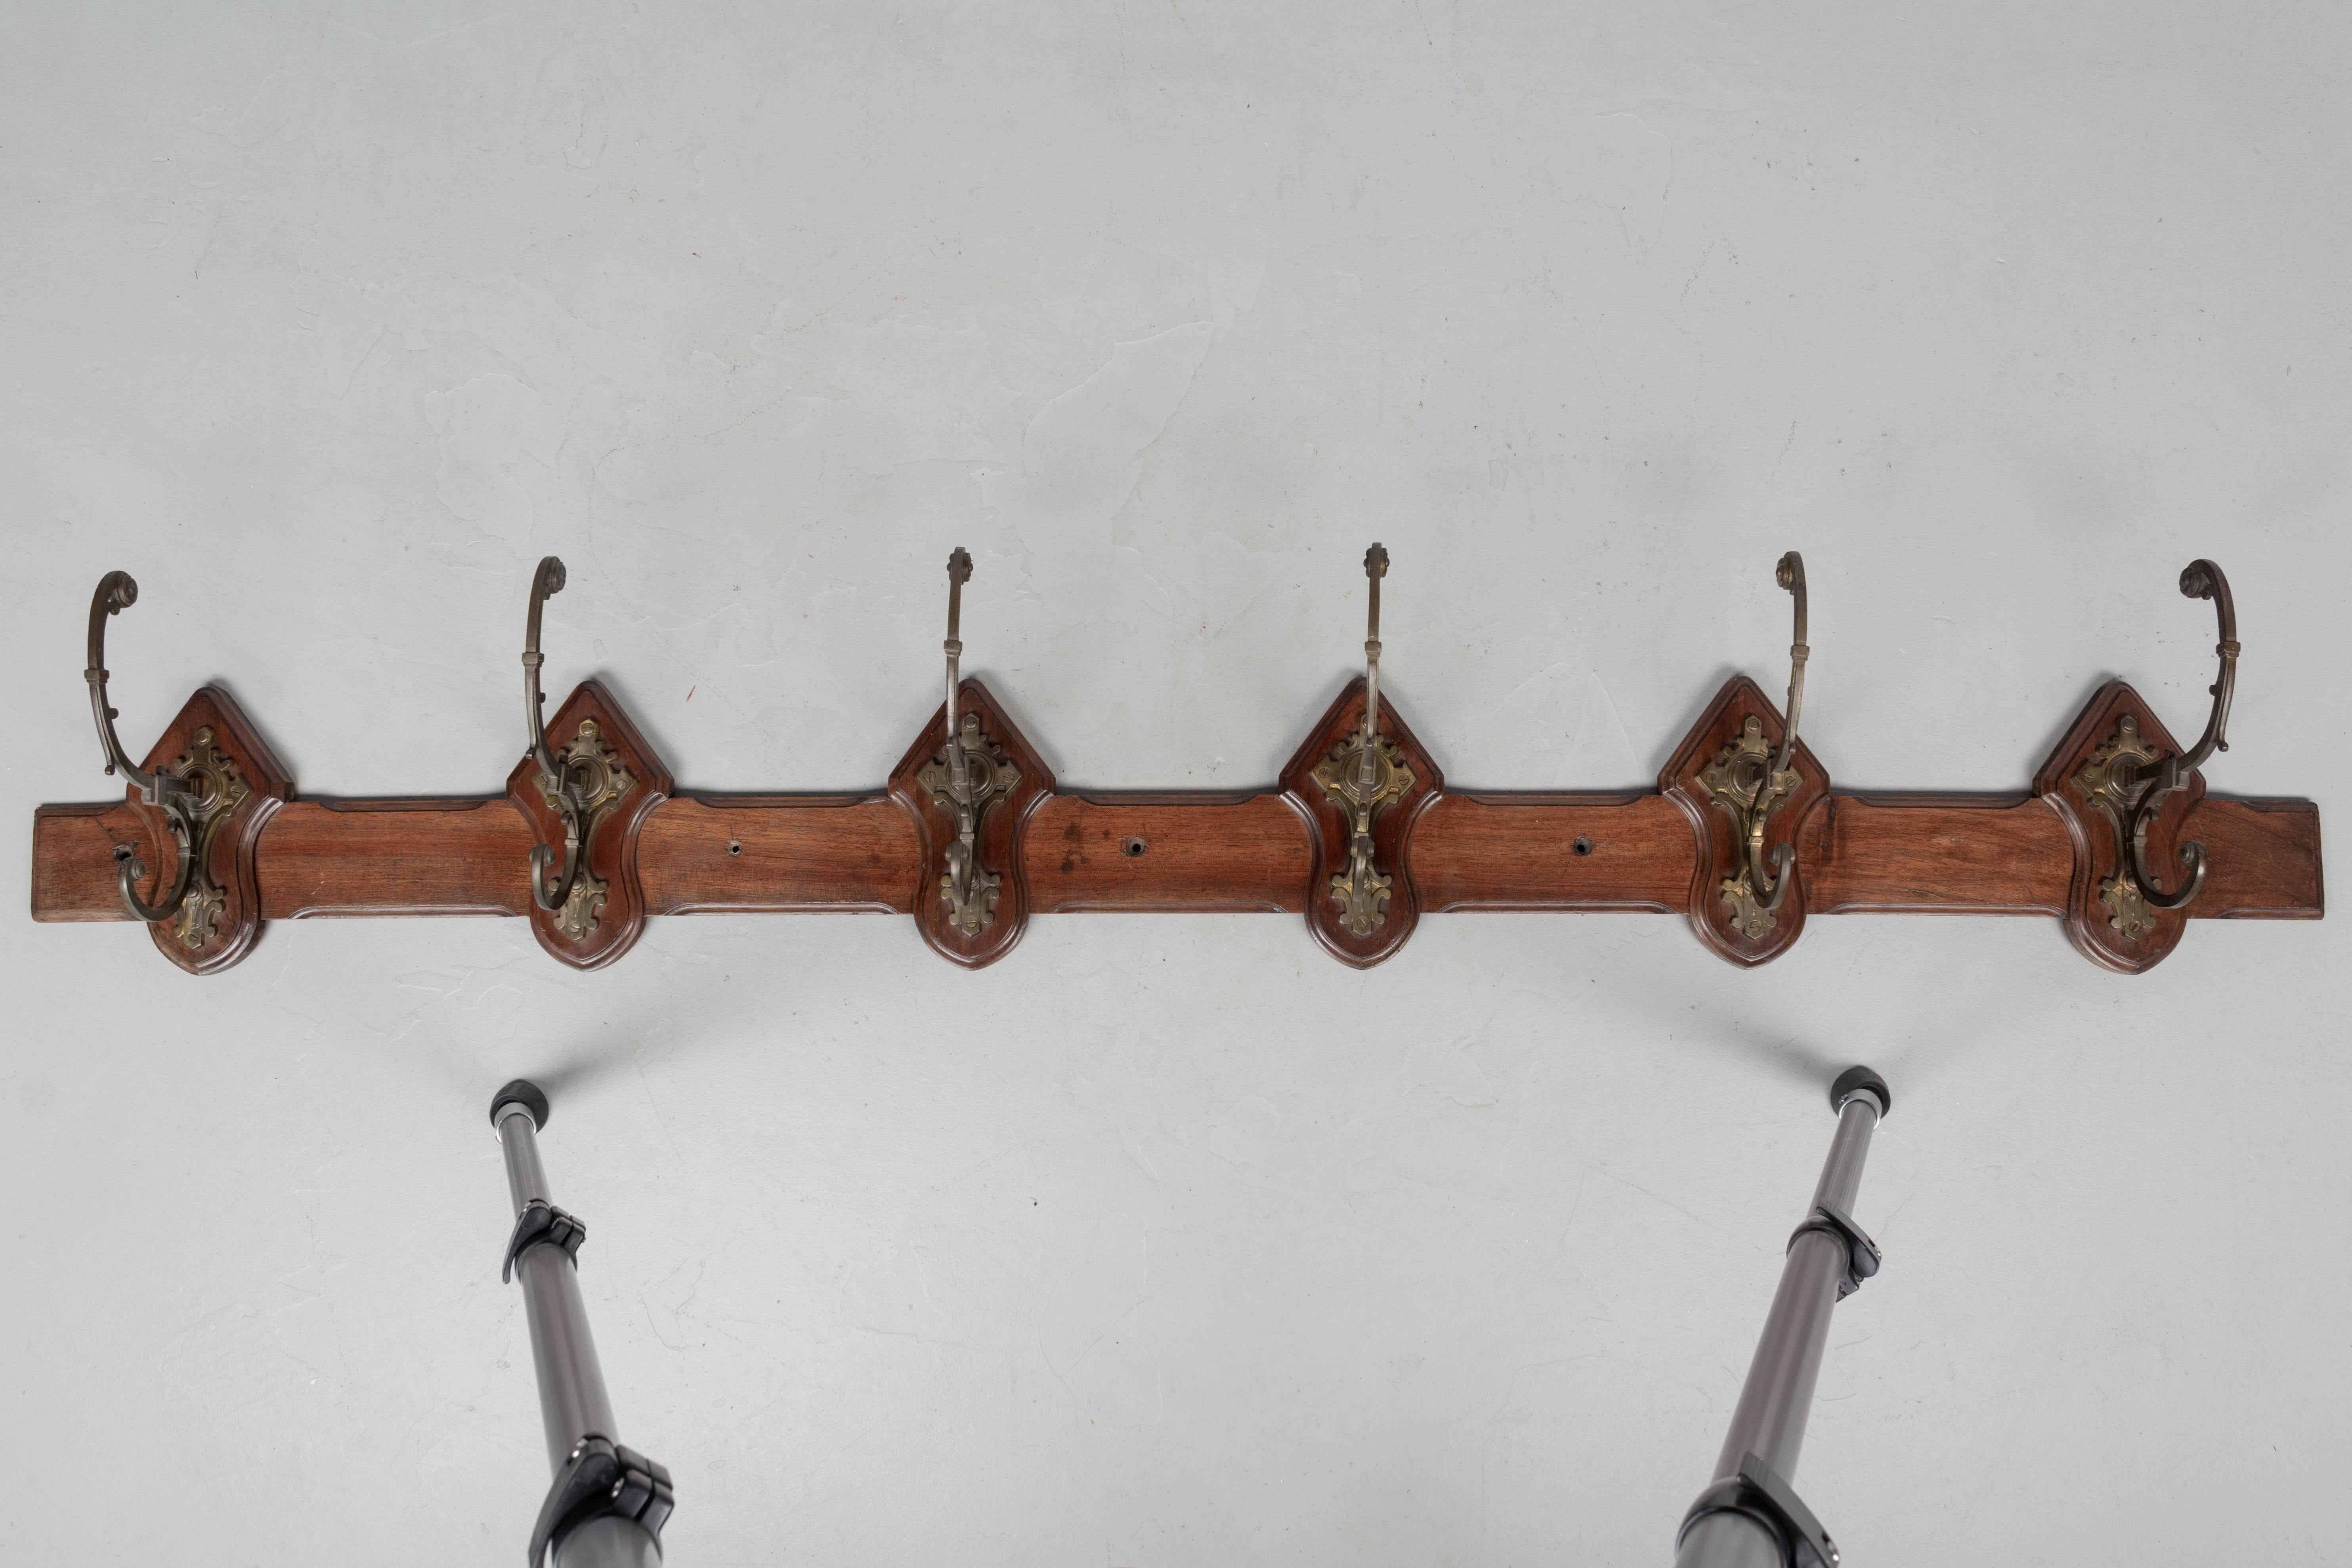 An early 20th century French mahogany wall mounted porte manteau, or coat rack, with six cast brass hooks. Good quality detailed casting. Circa 1900-1920. 
Dimensions: 71